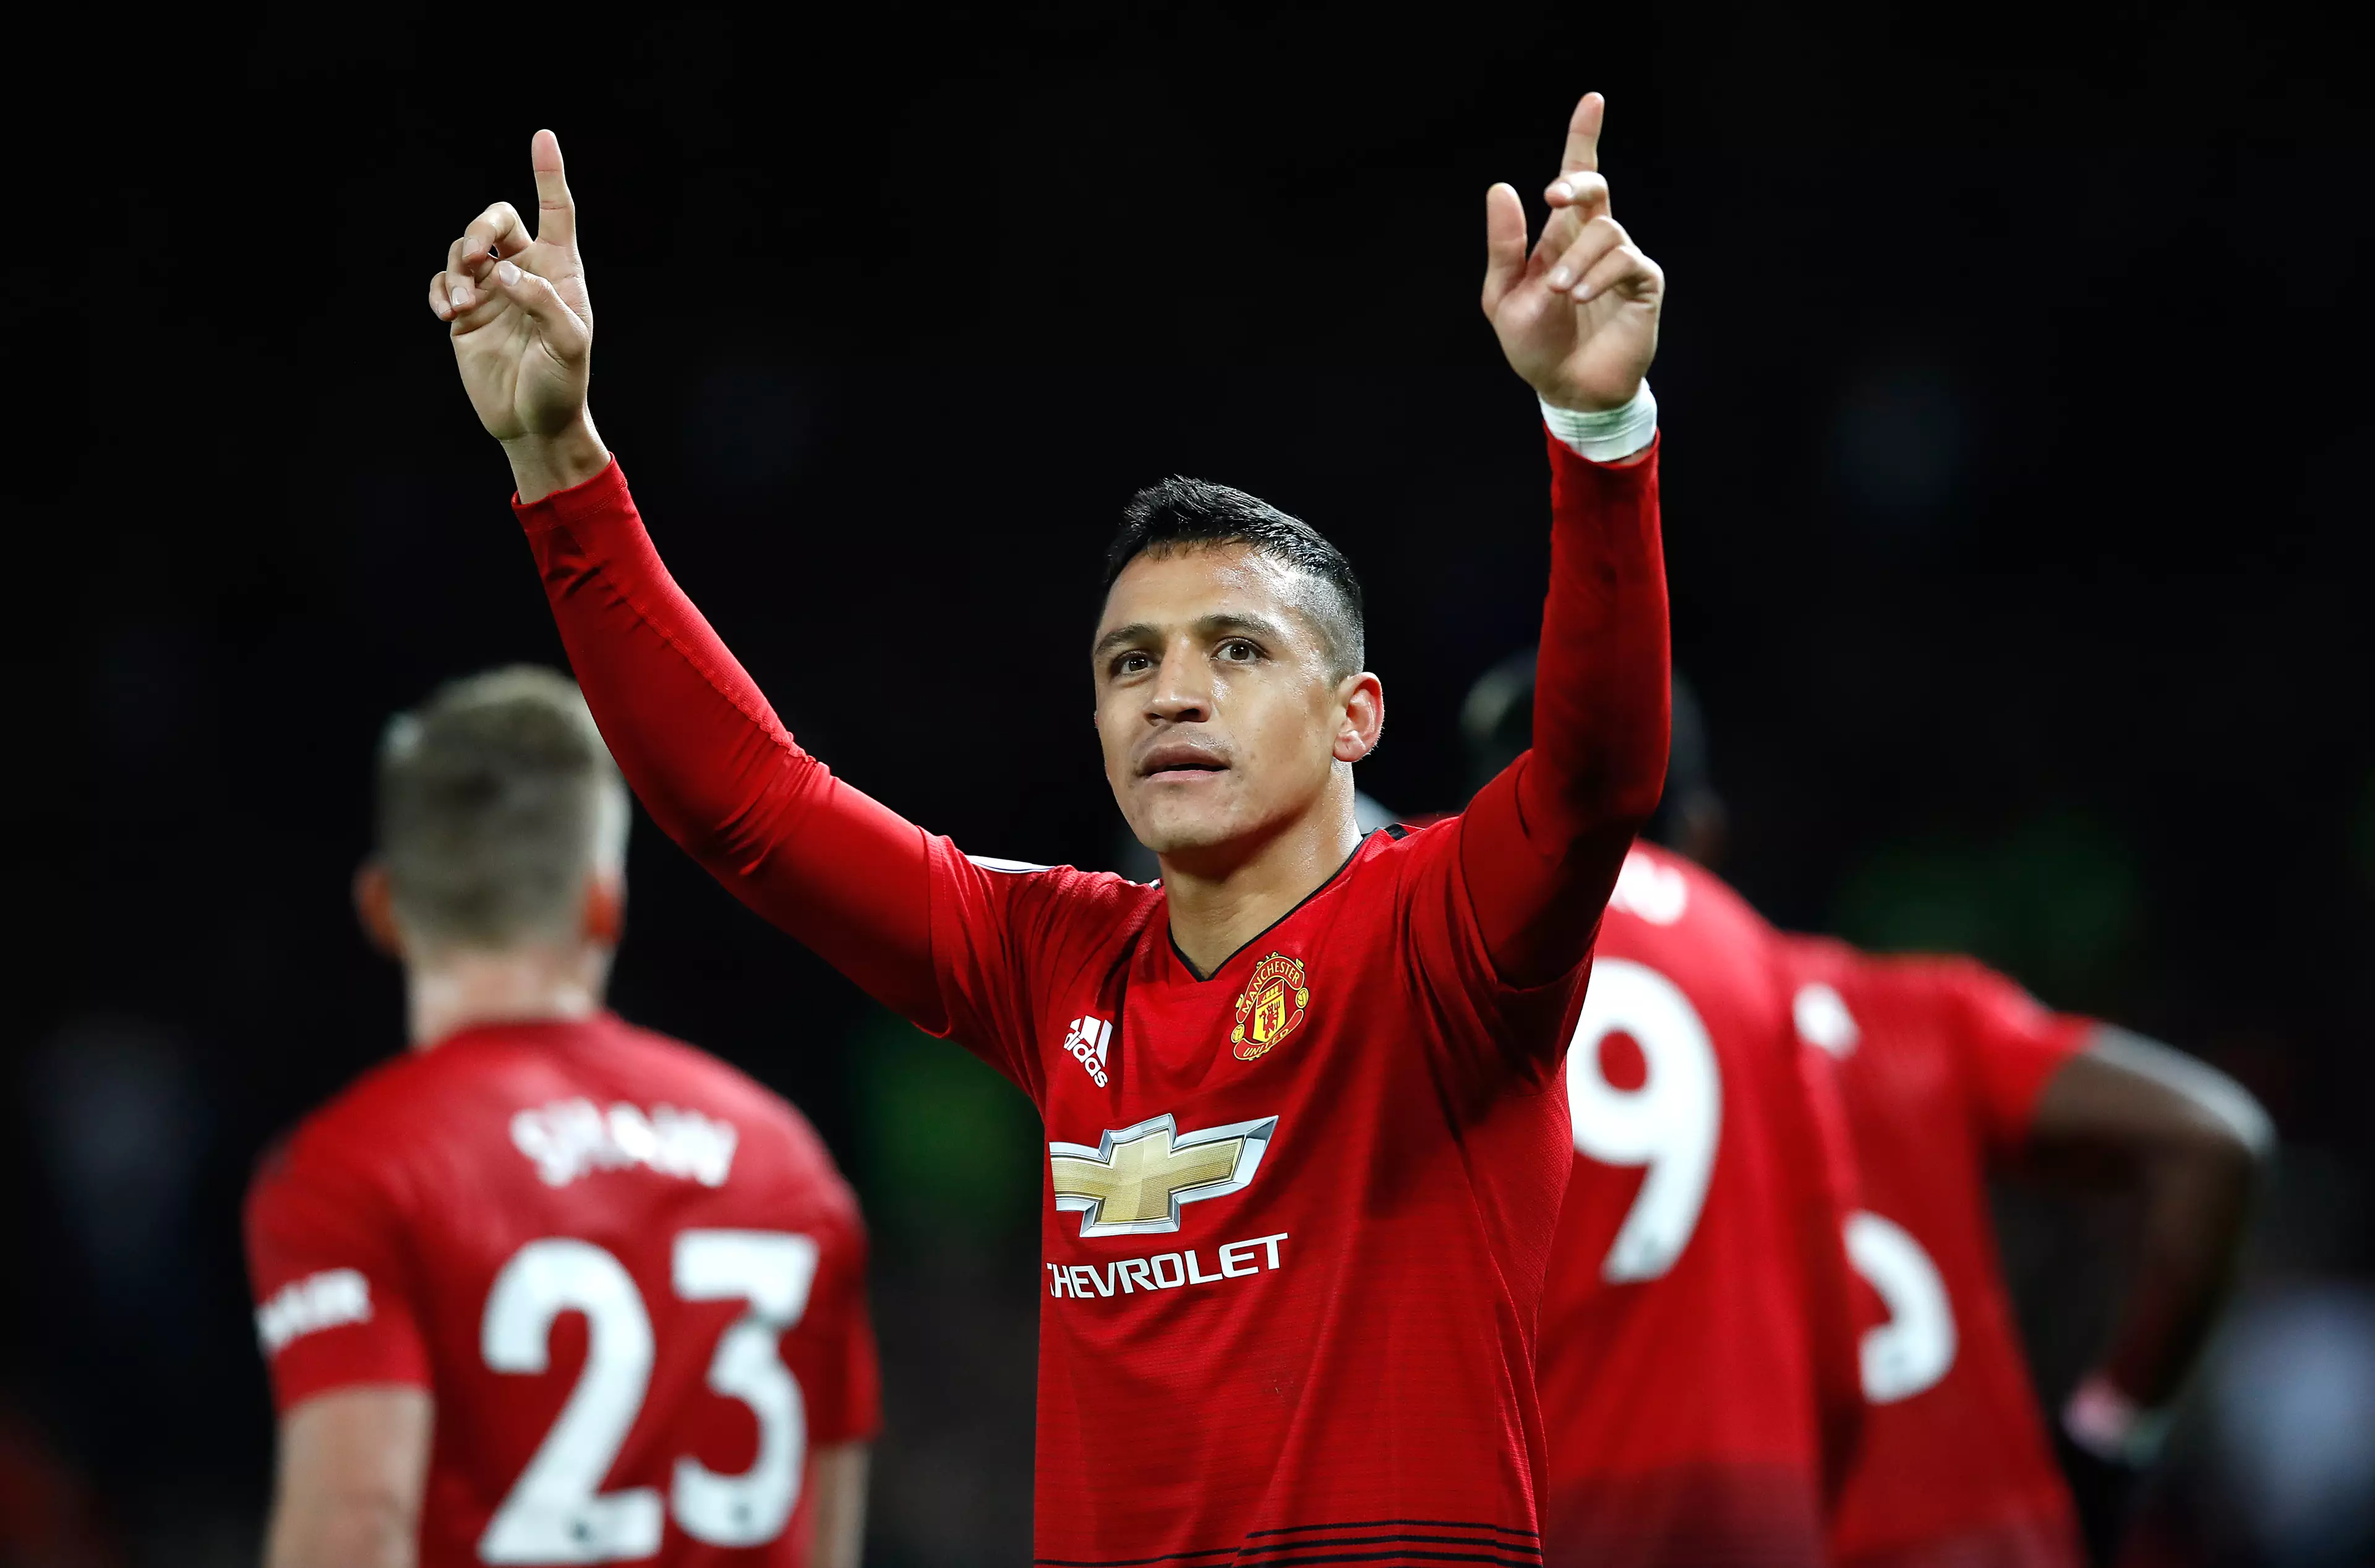 Sanchez hasn't had much to celebrate recently. Image: PA Images